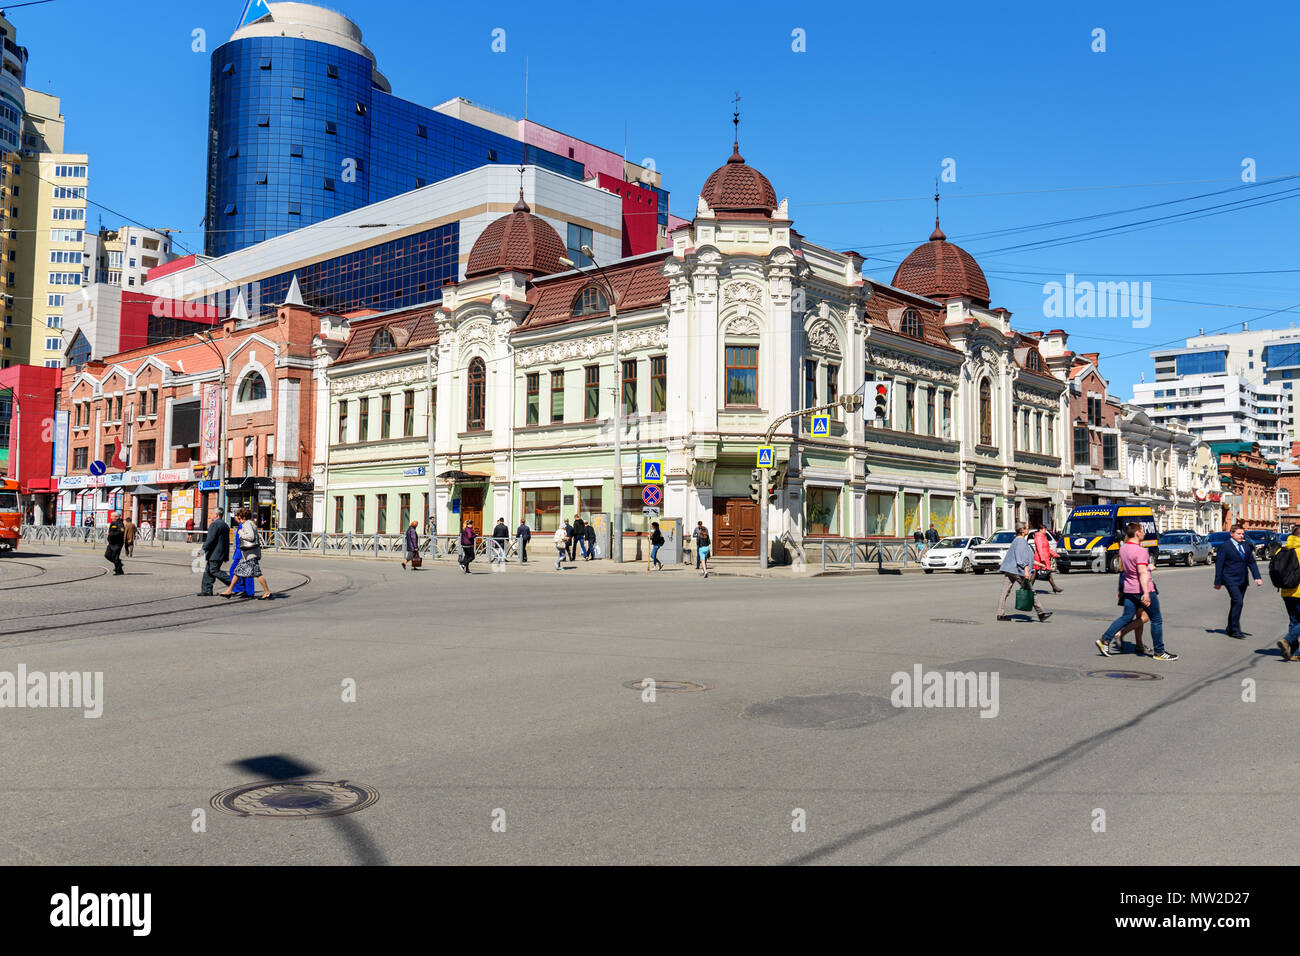 Yekaterinburg, Russia - May 23, 2018: View of 8th March Street. Profitable house of merchant Pervushin Stock Photo